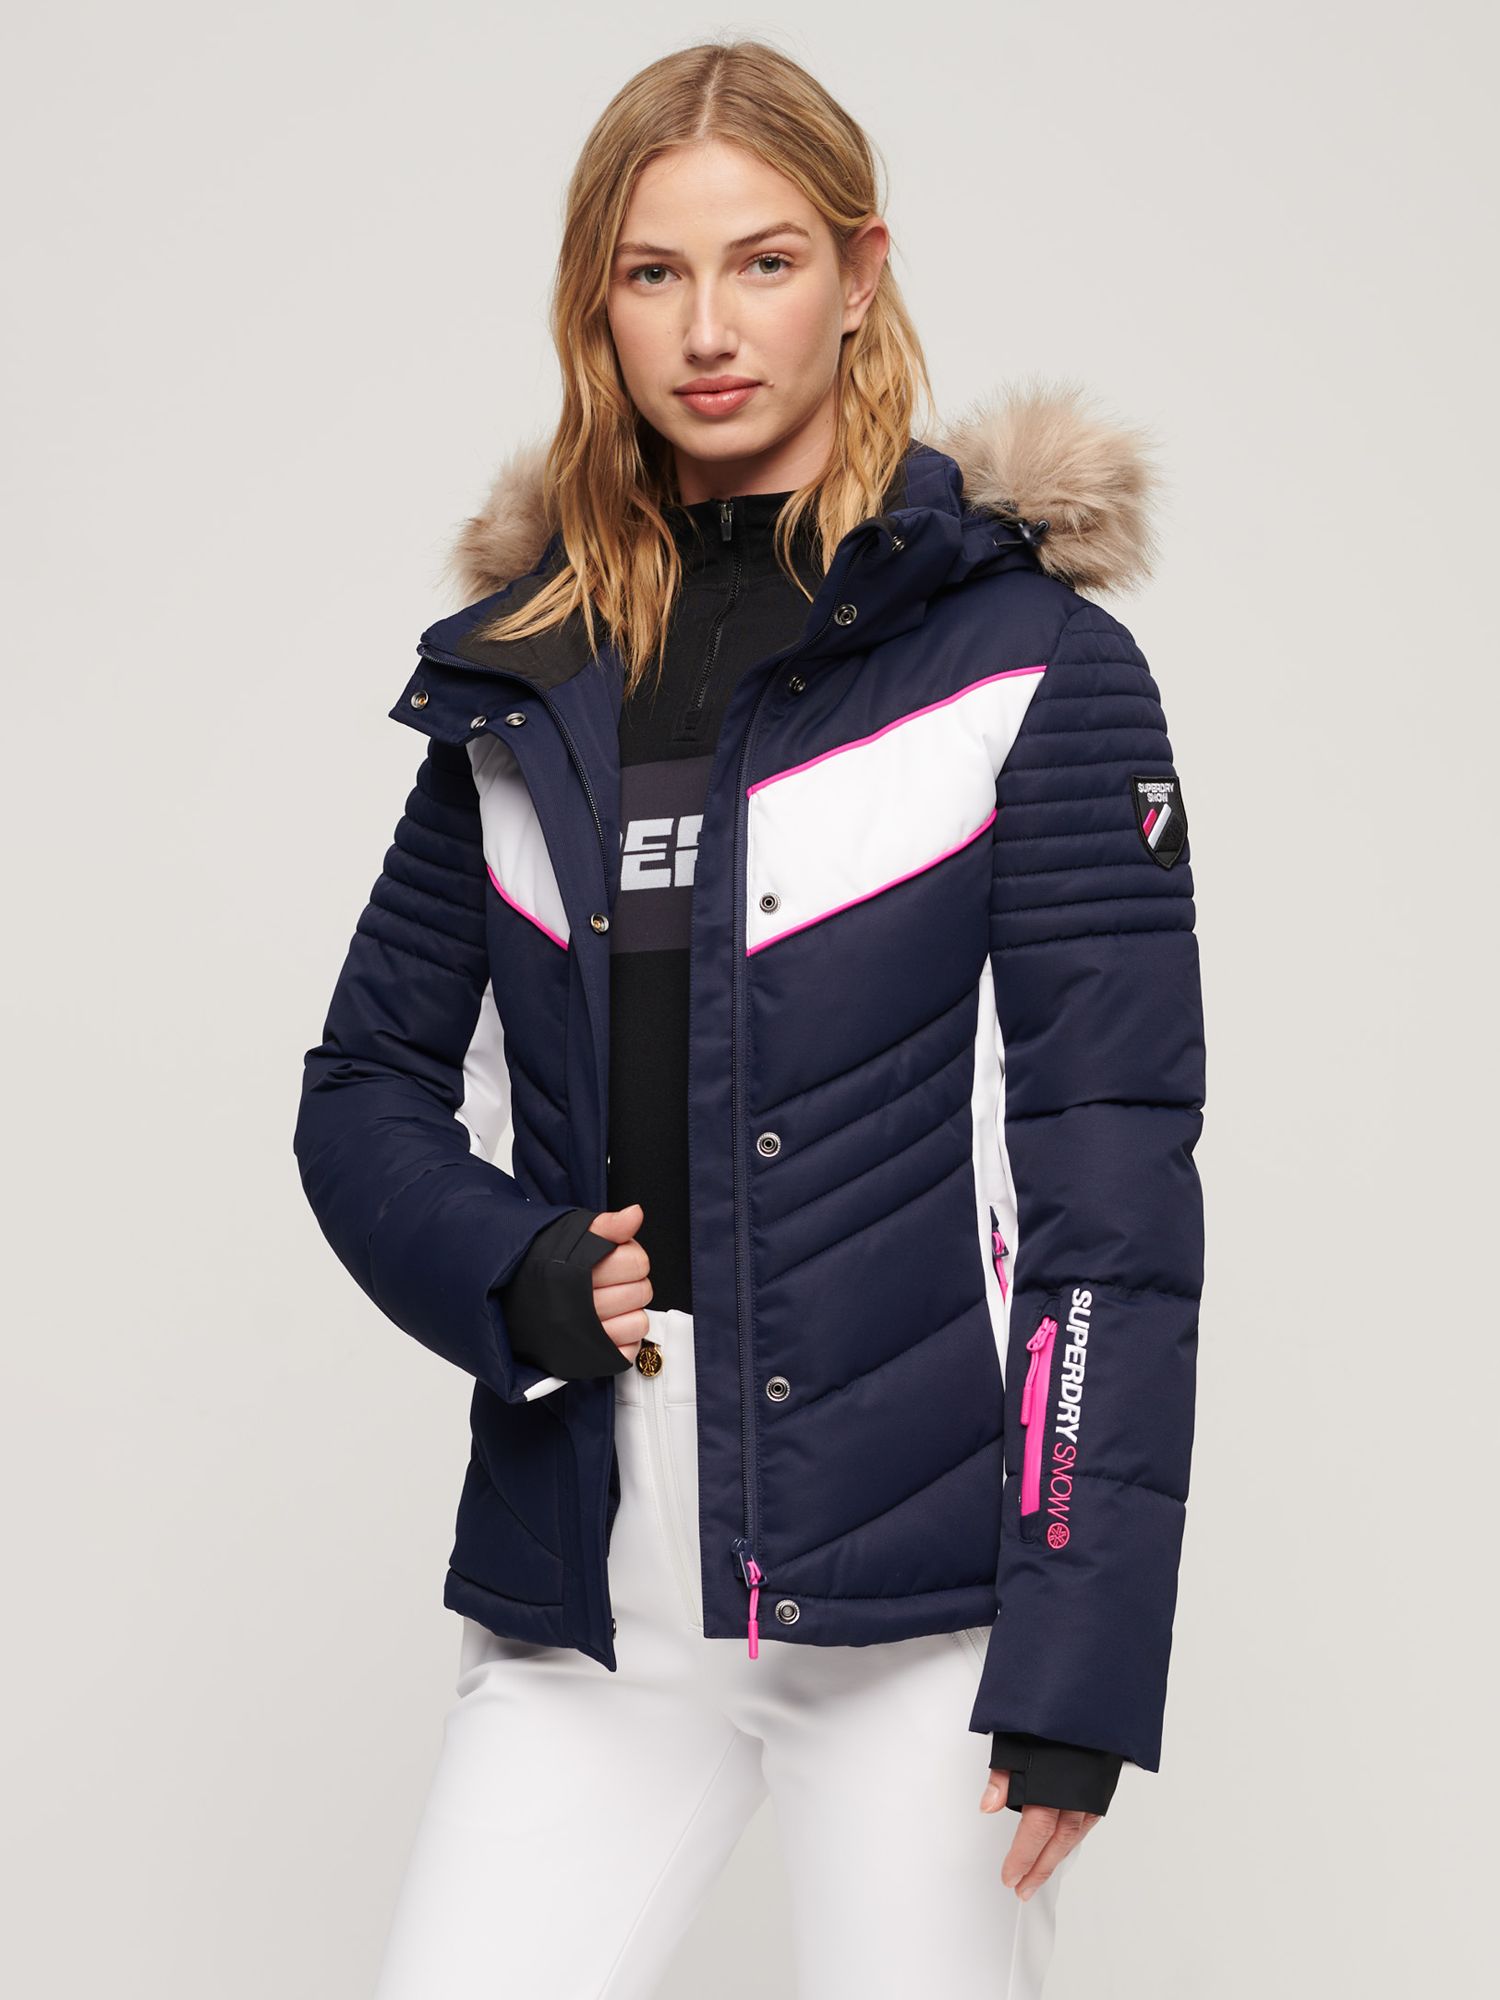 Superdry Ski Luxe Women's Puffer Jacket, Rich Navy at John Lewis & Partners